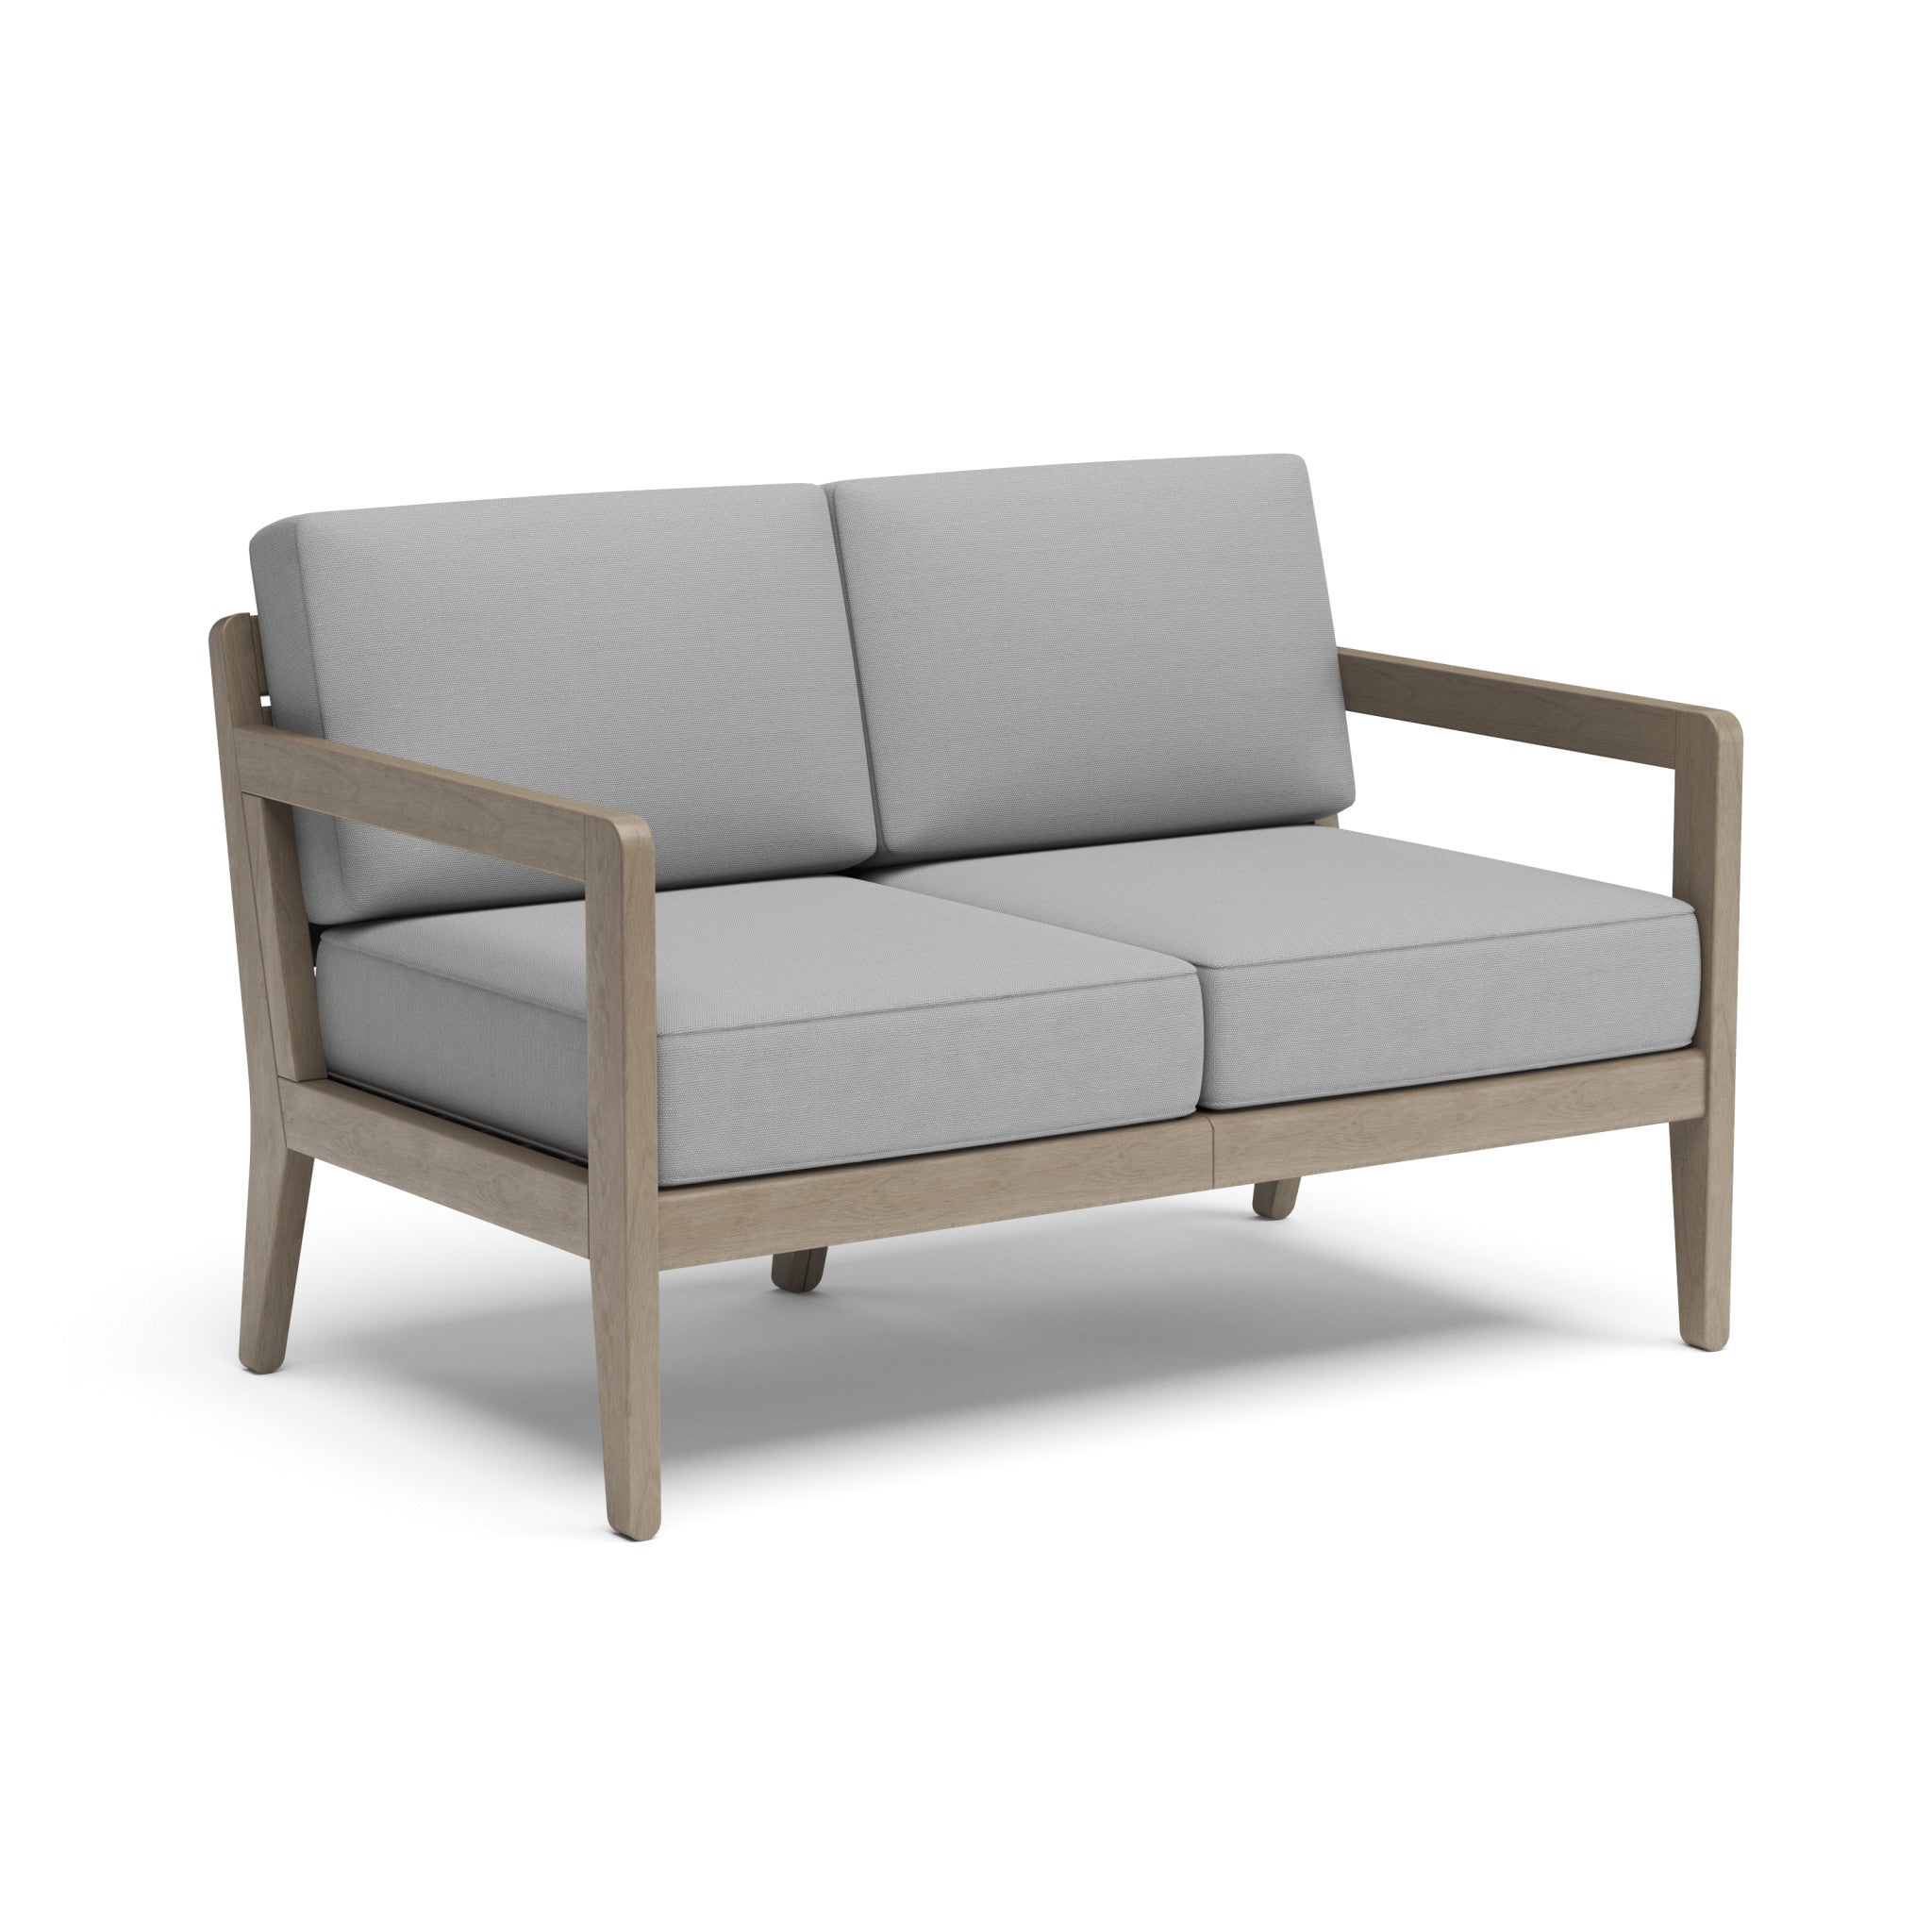 Sustain Outdoor loveseat 4-Piece Set by Homestyles - Gray - Wood - 5675-6010D21